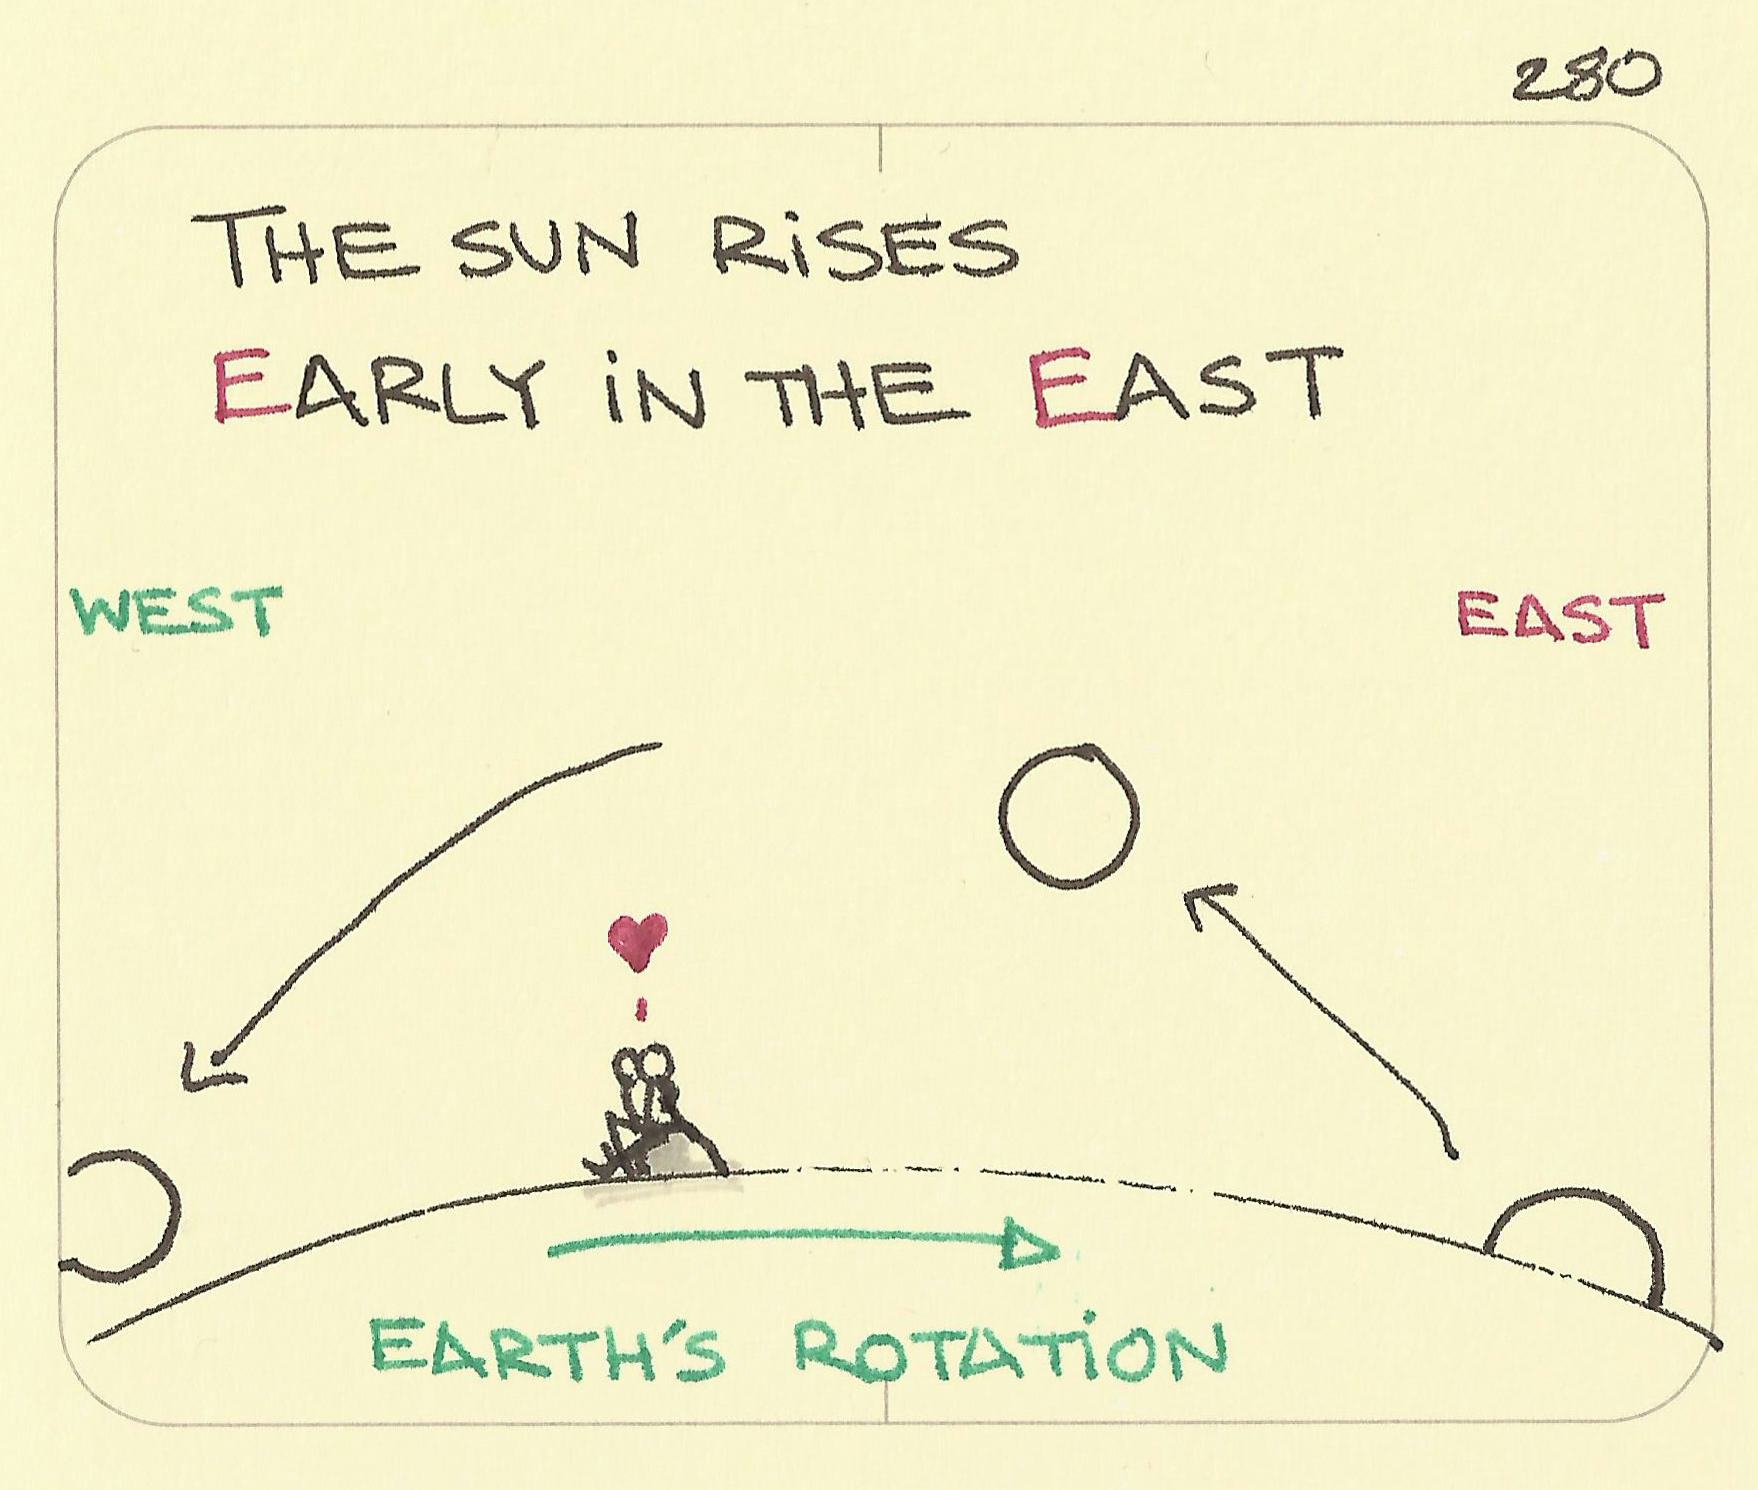 The sun rises Early in the East - Sketchplanations